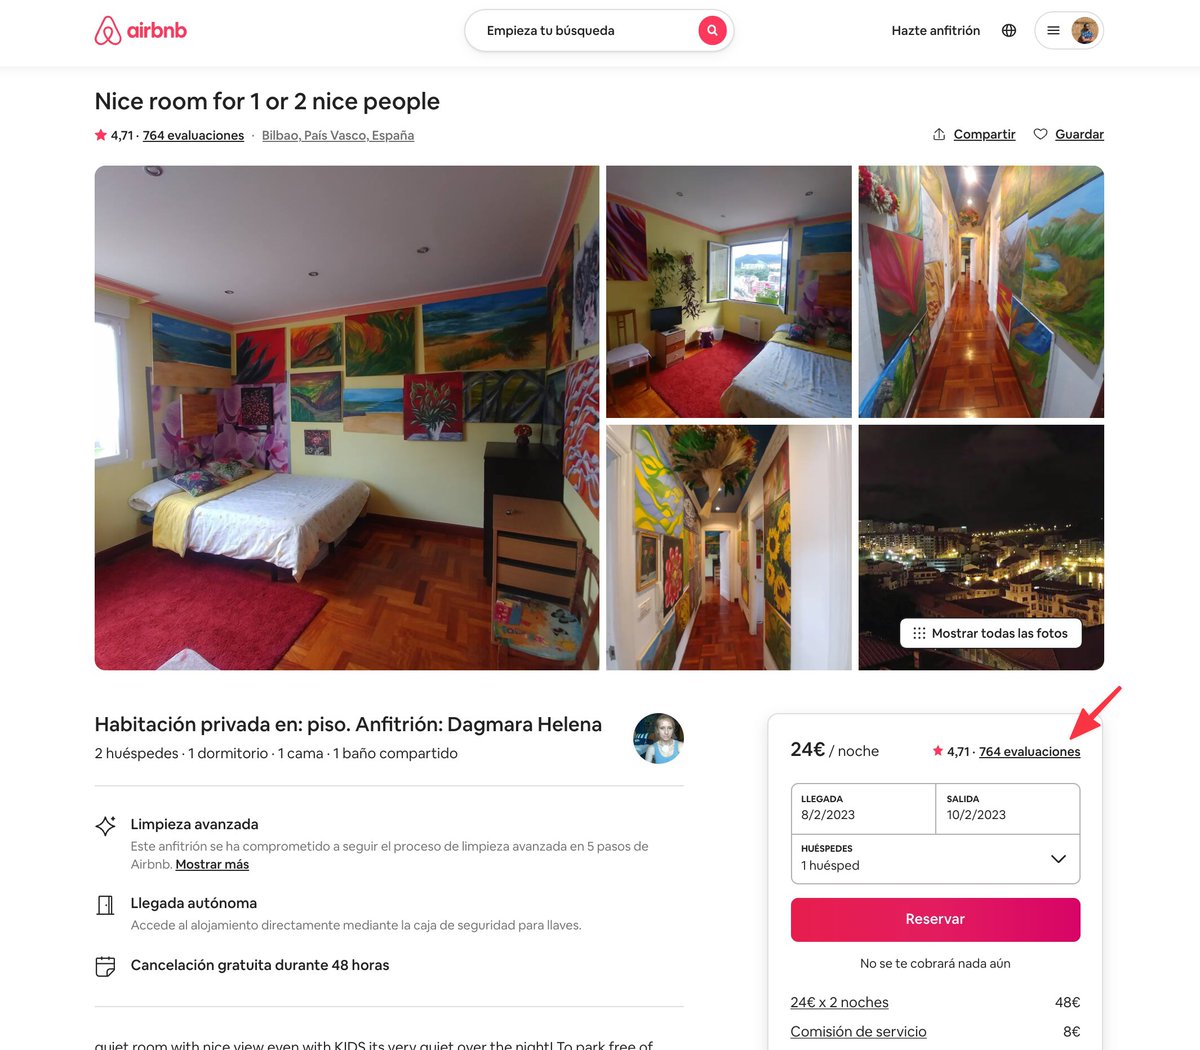 Victoriano Izquierdo Twitter Tweet: I am analyzing all the Airbnbs in Spain (342.000) with @graphext . You will be surprised who has the record of having the most reviews. 

This lady from Bilbao rents a room from 24€ the night with over 764 reviews. 4.7⭐️. The house looks like a museum! https://t.co/lBtO38P3R4 https://t.co/sjlsSmpsRE